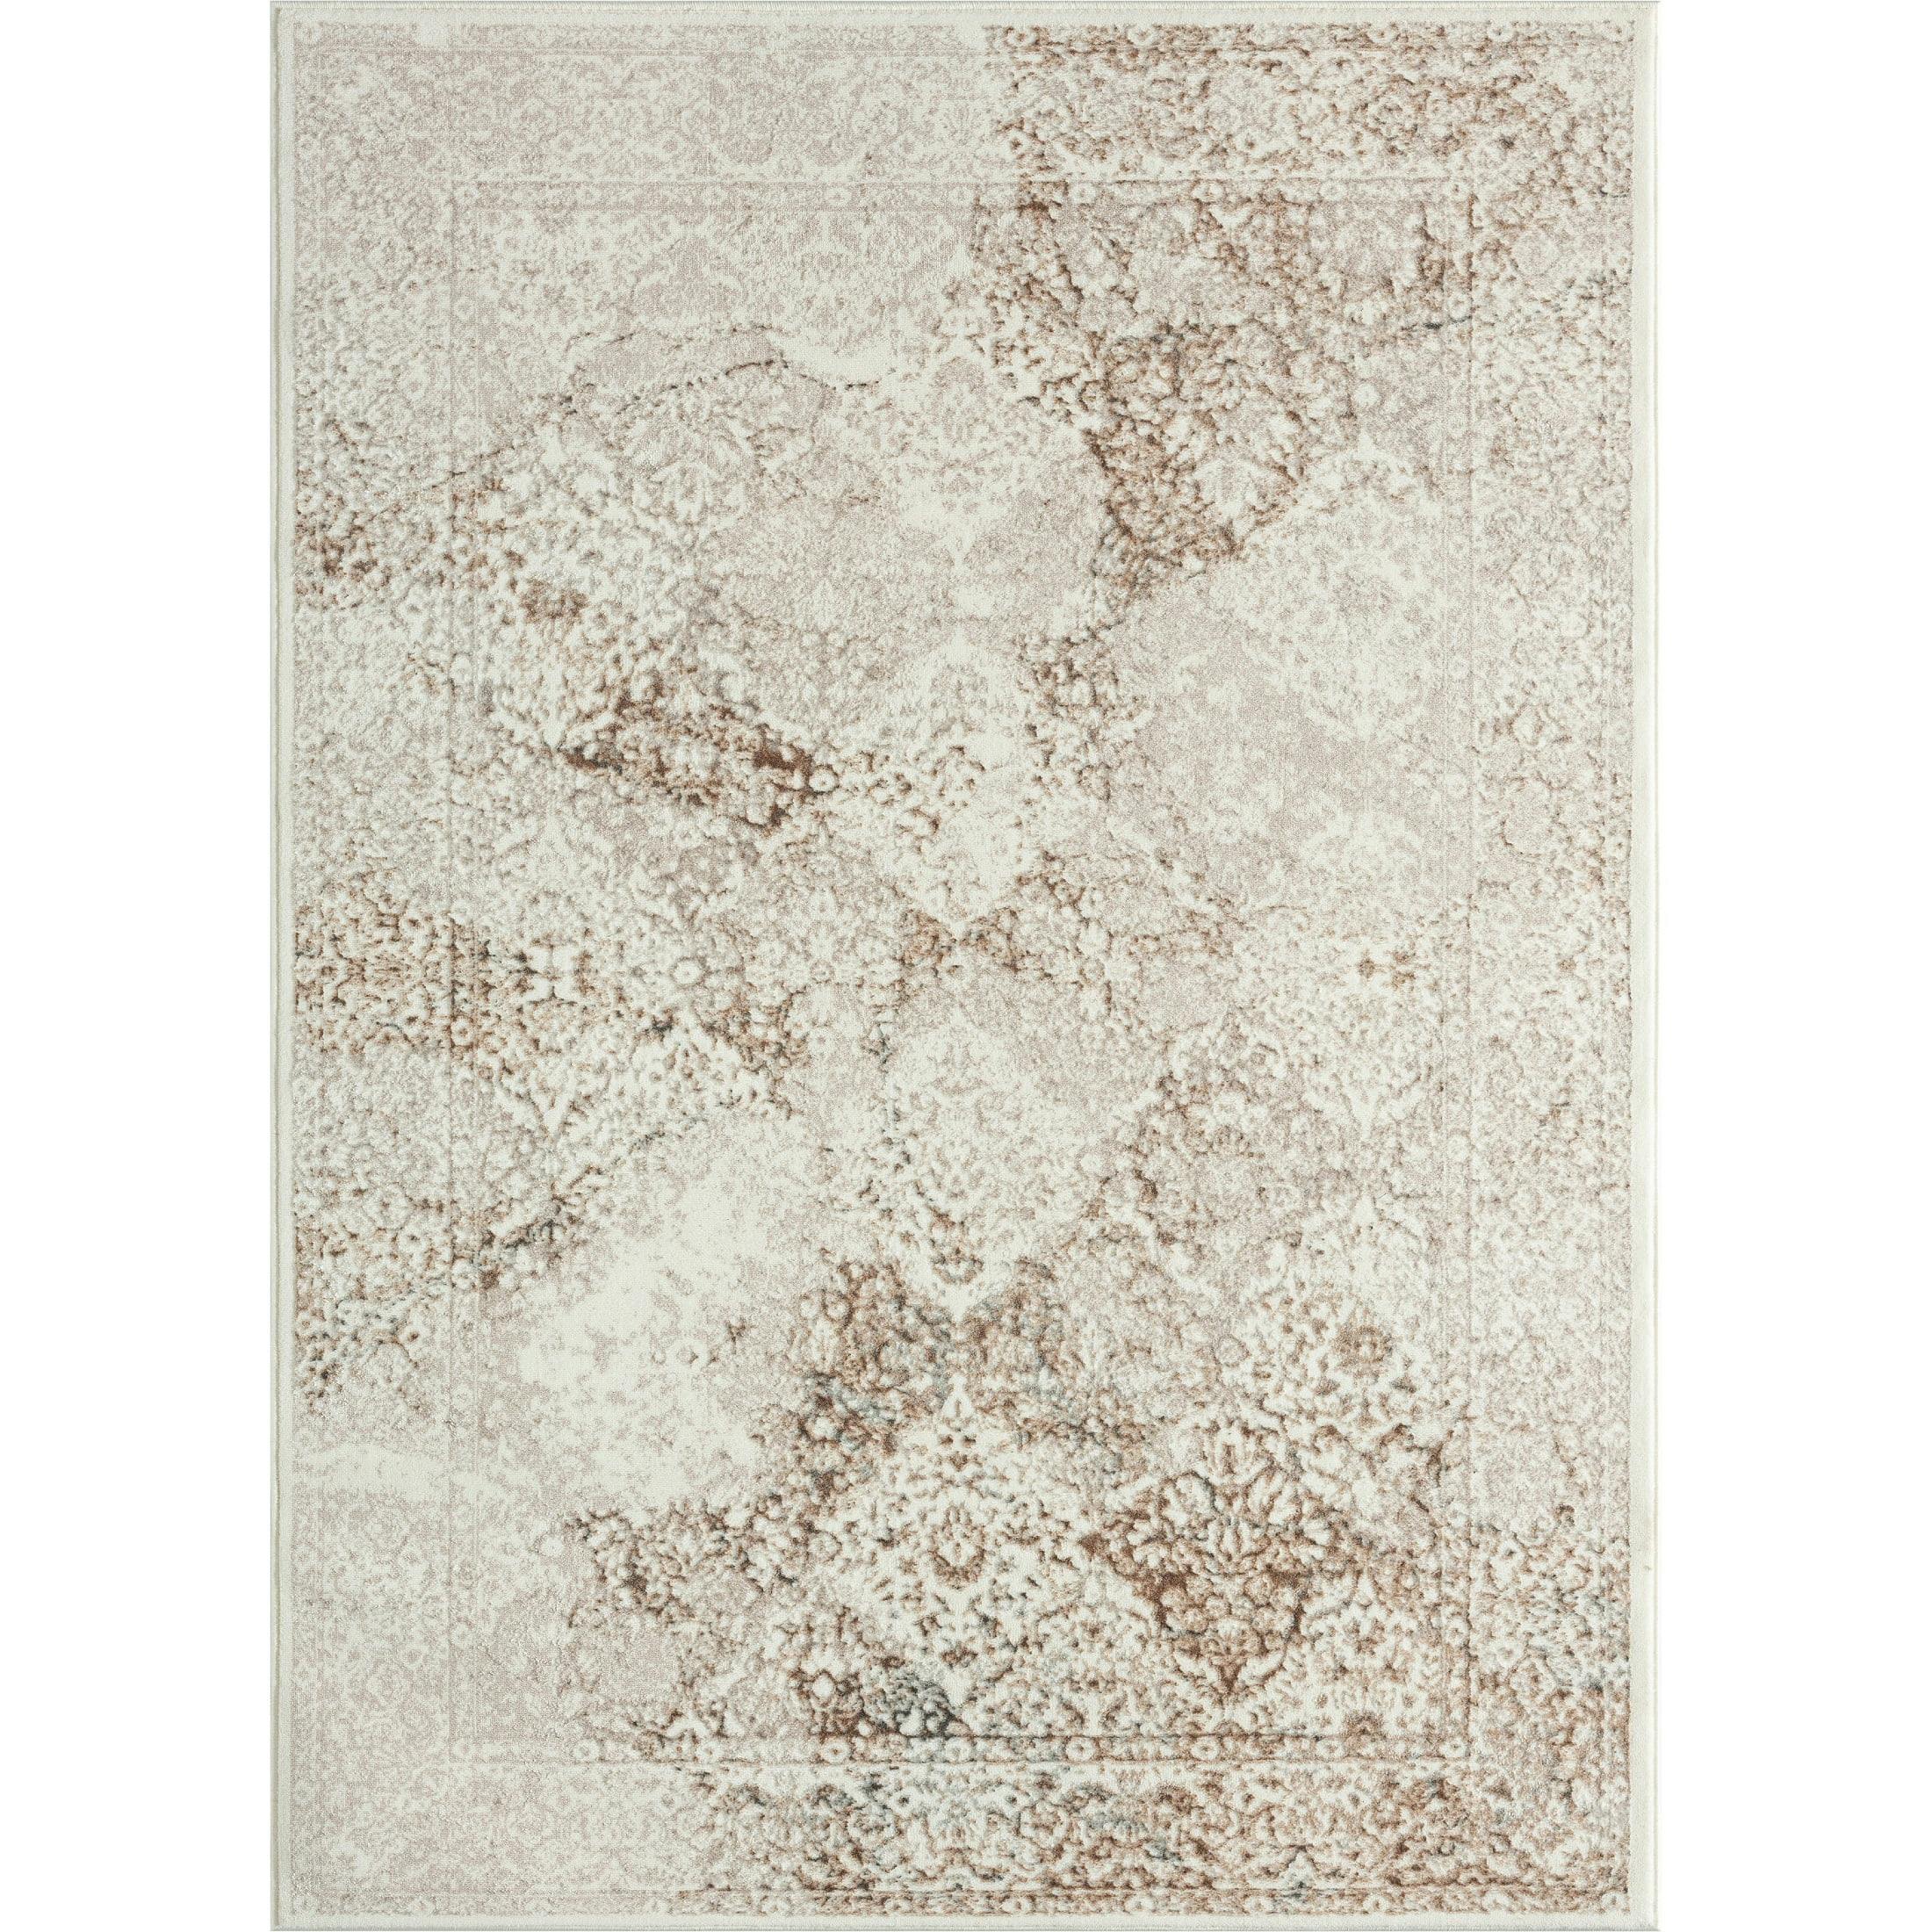 Reversible Easy-Care Damask Beige 5' x 7' Synthetic Area Rug